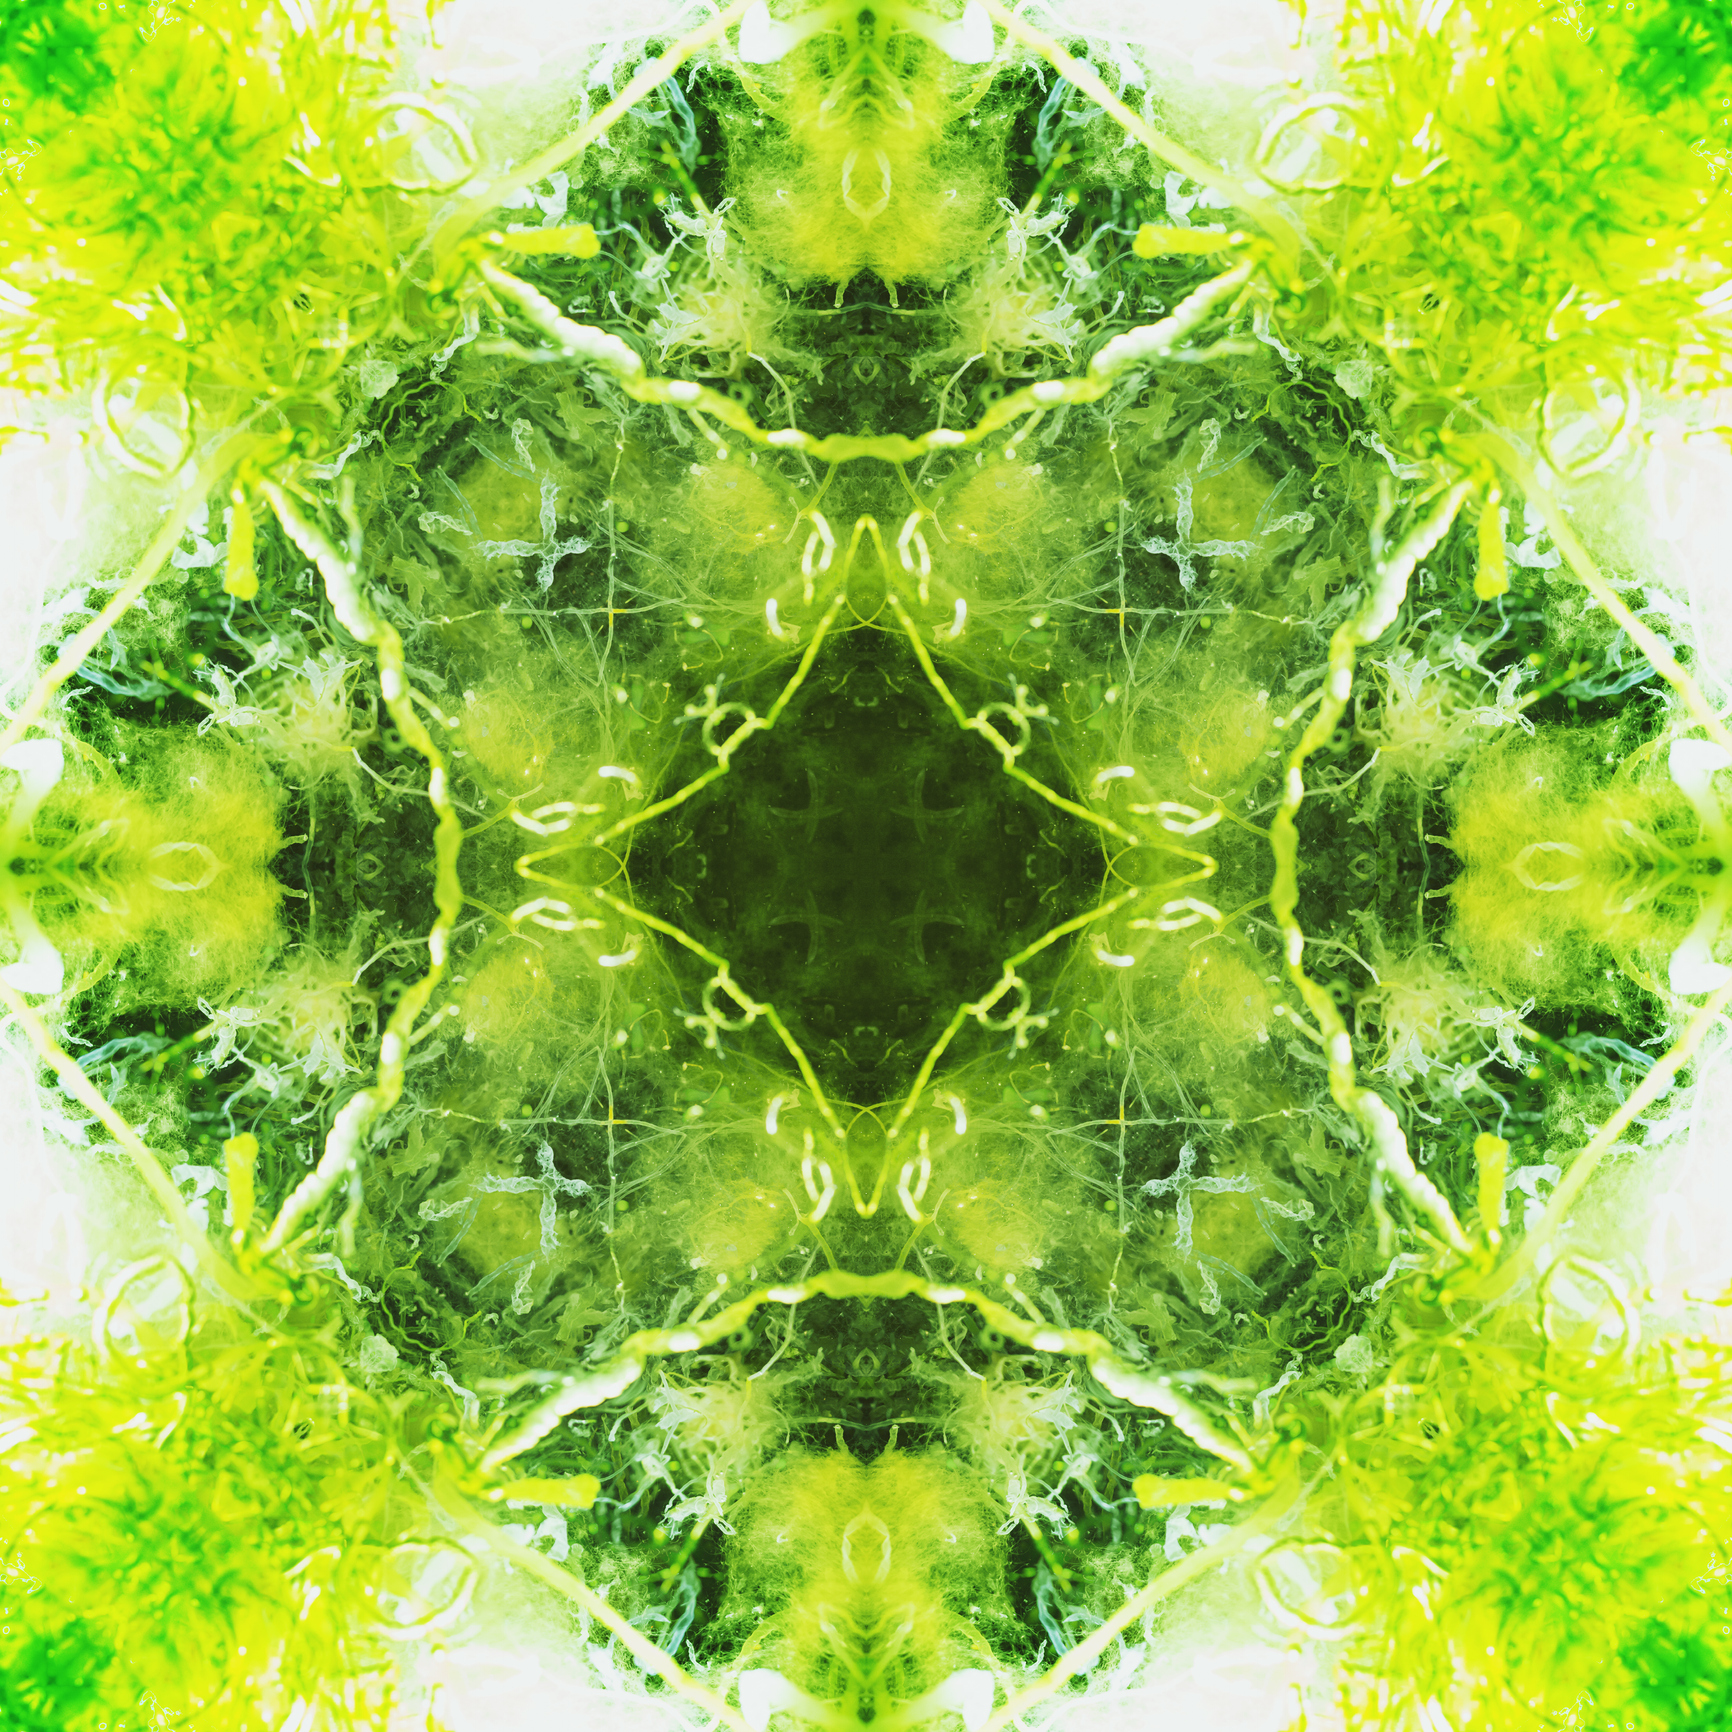 A kaleidoscope image of a symmetrical pattern in various shades of green.